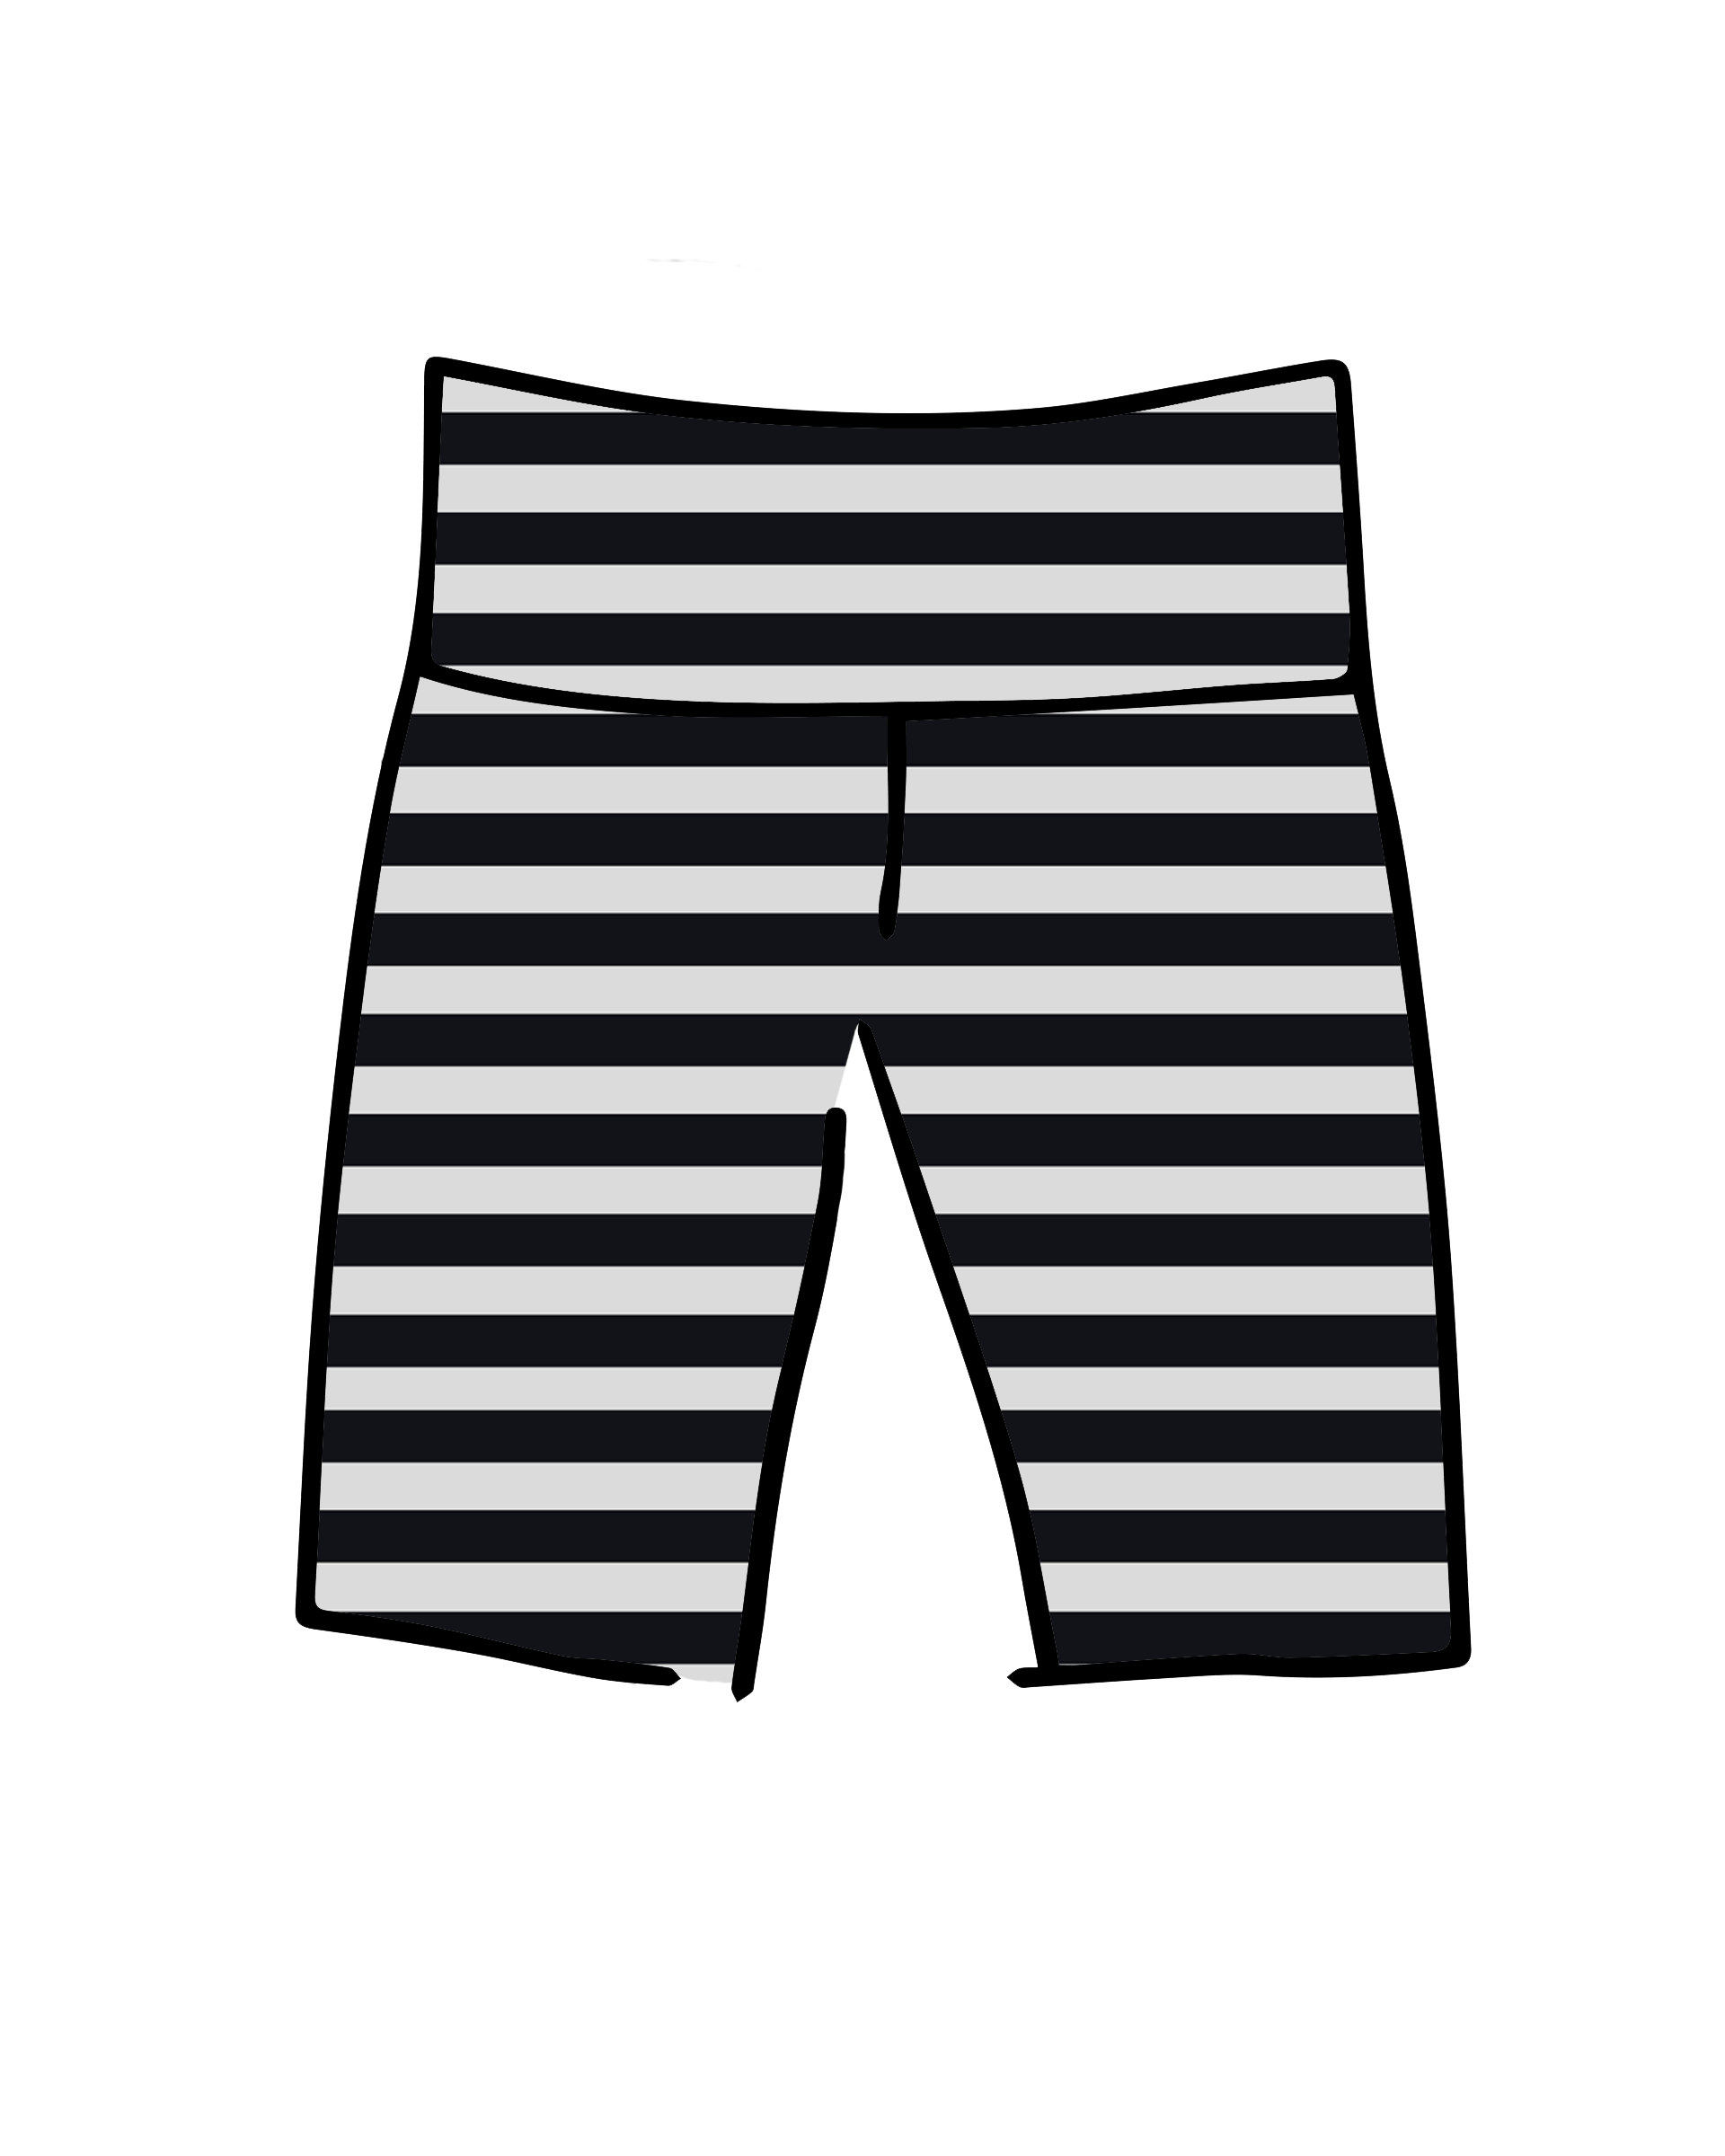 Drawing of Thunderpants Bike Shorts in Black and White Stripe.